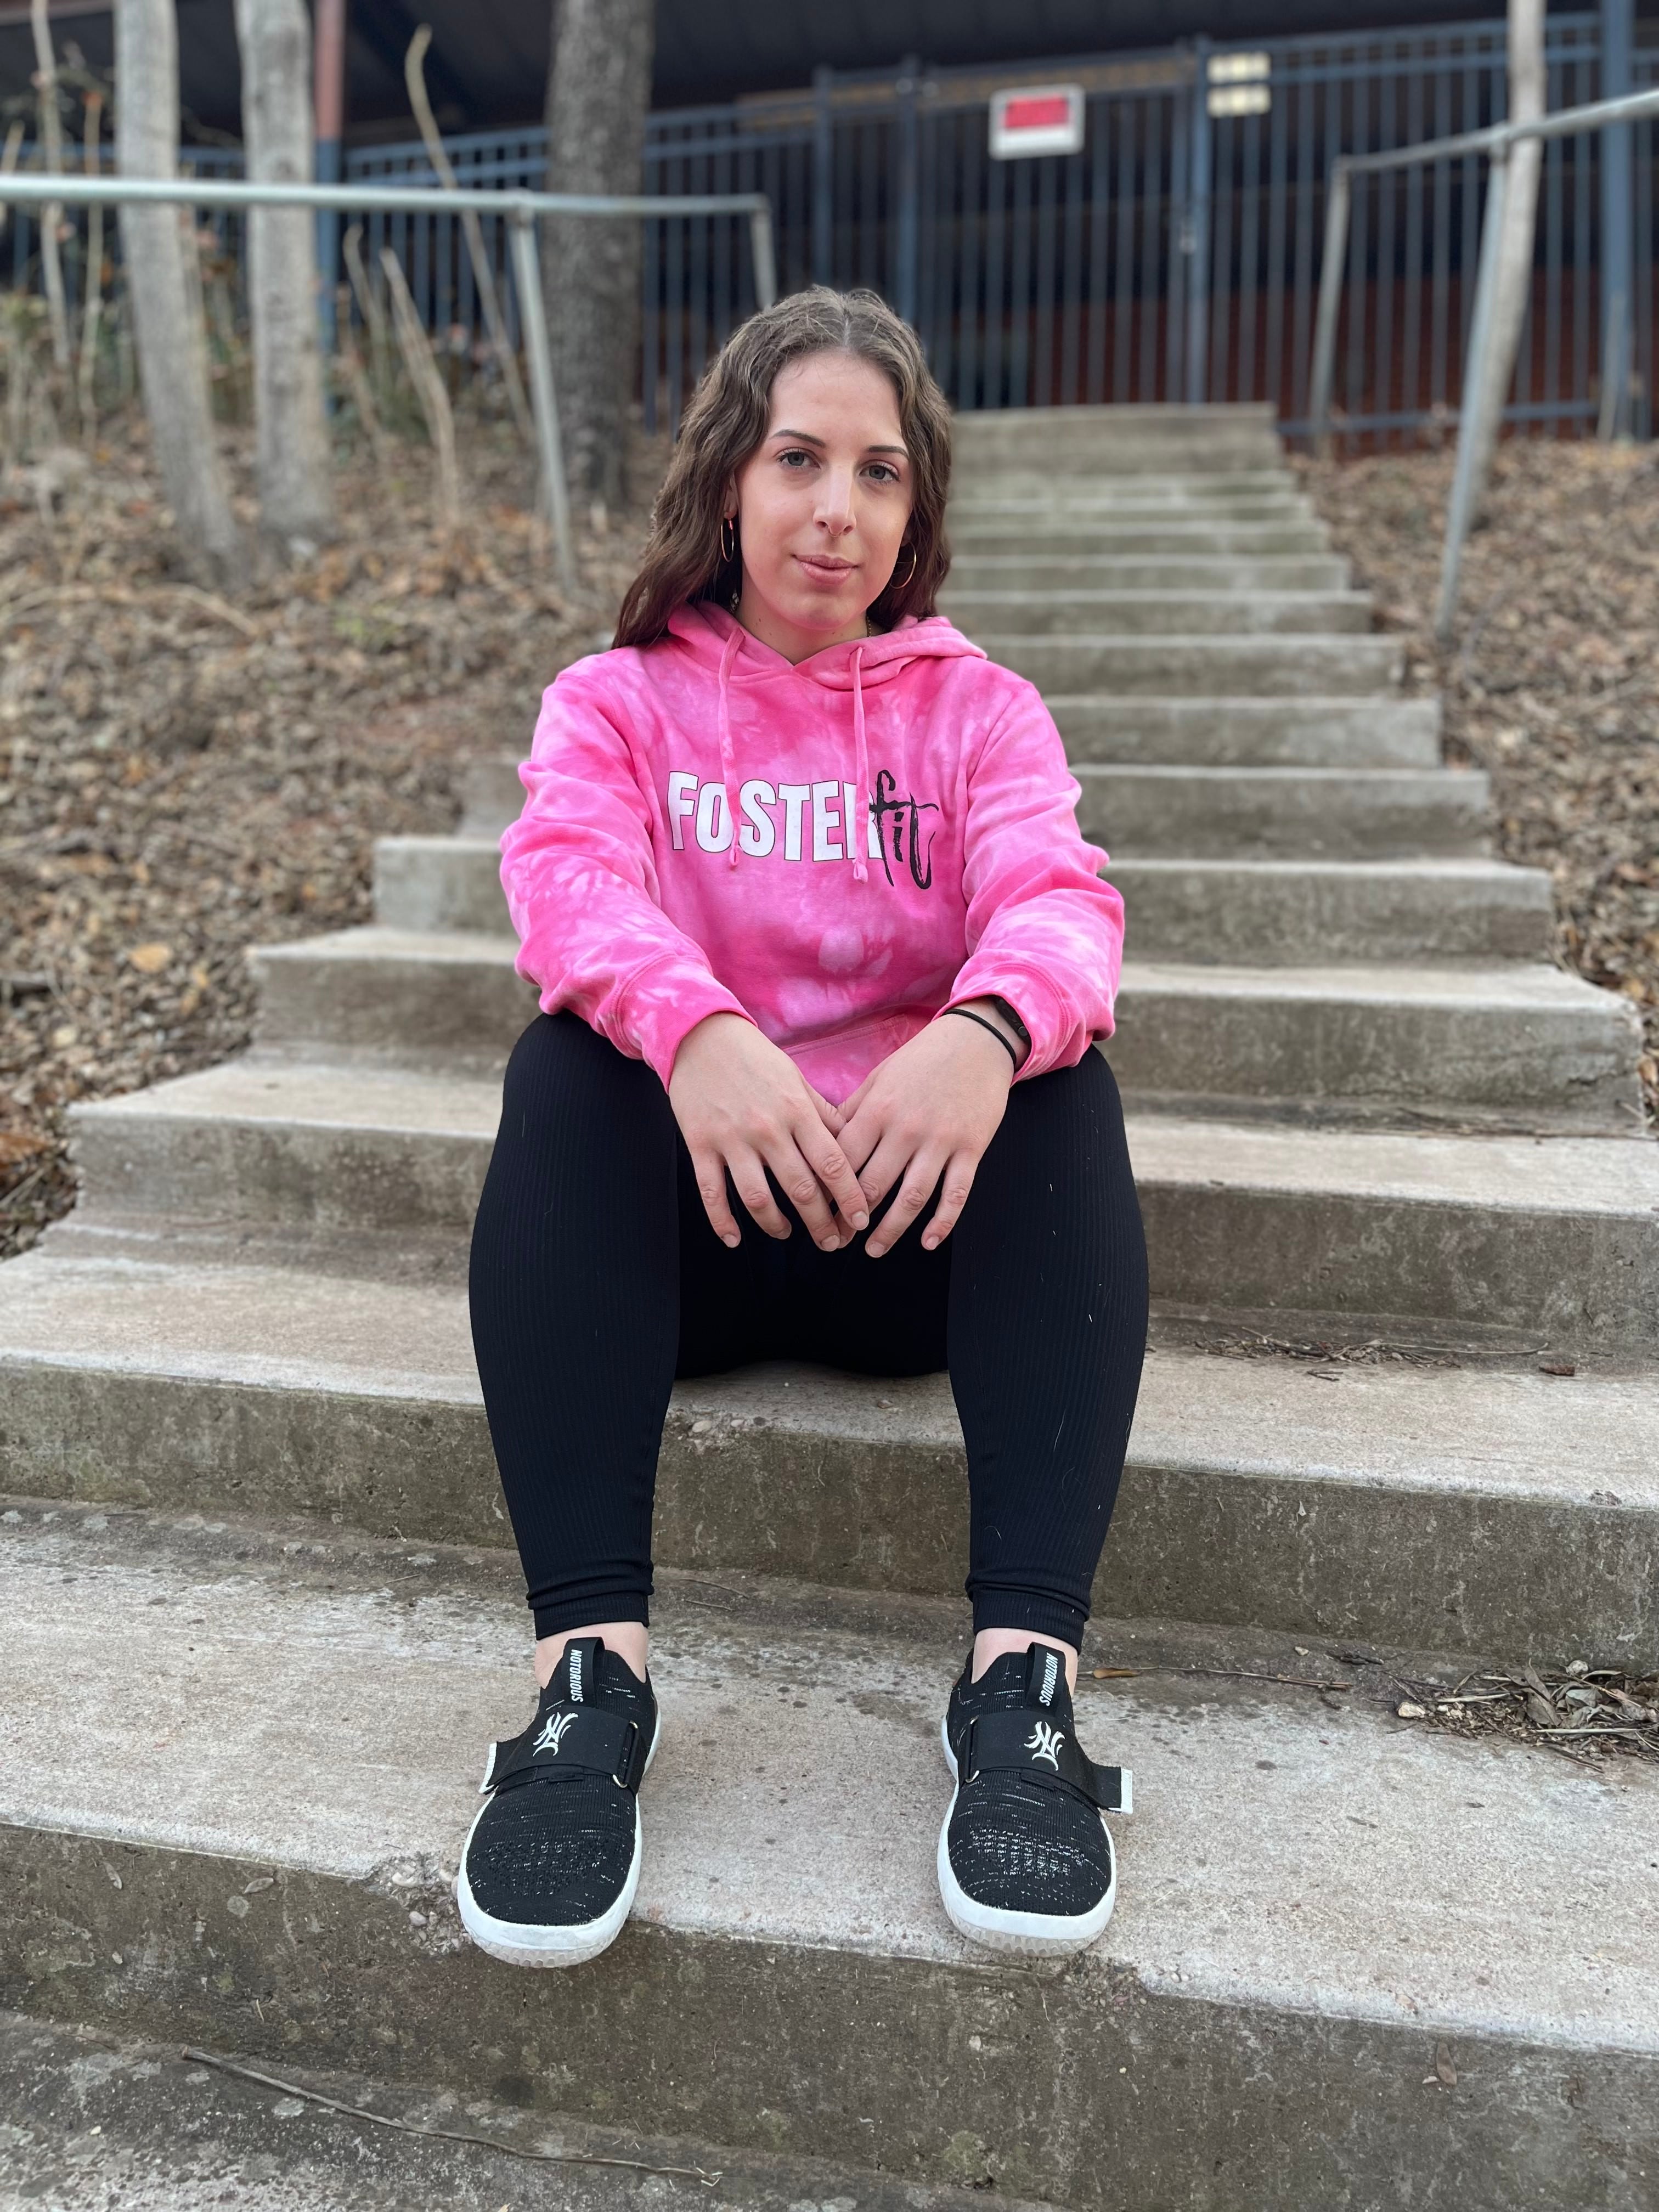 Foster Fit Pink Hoodie